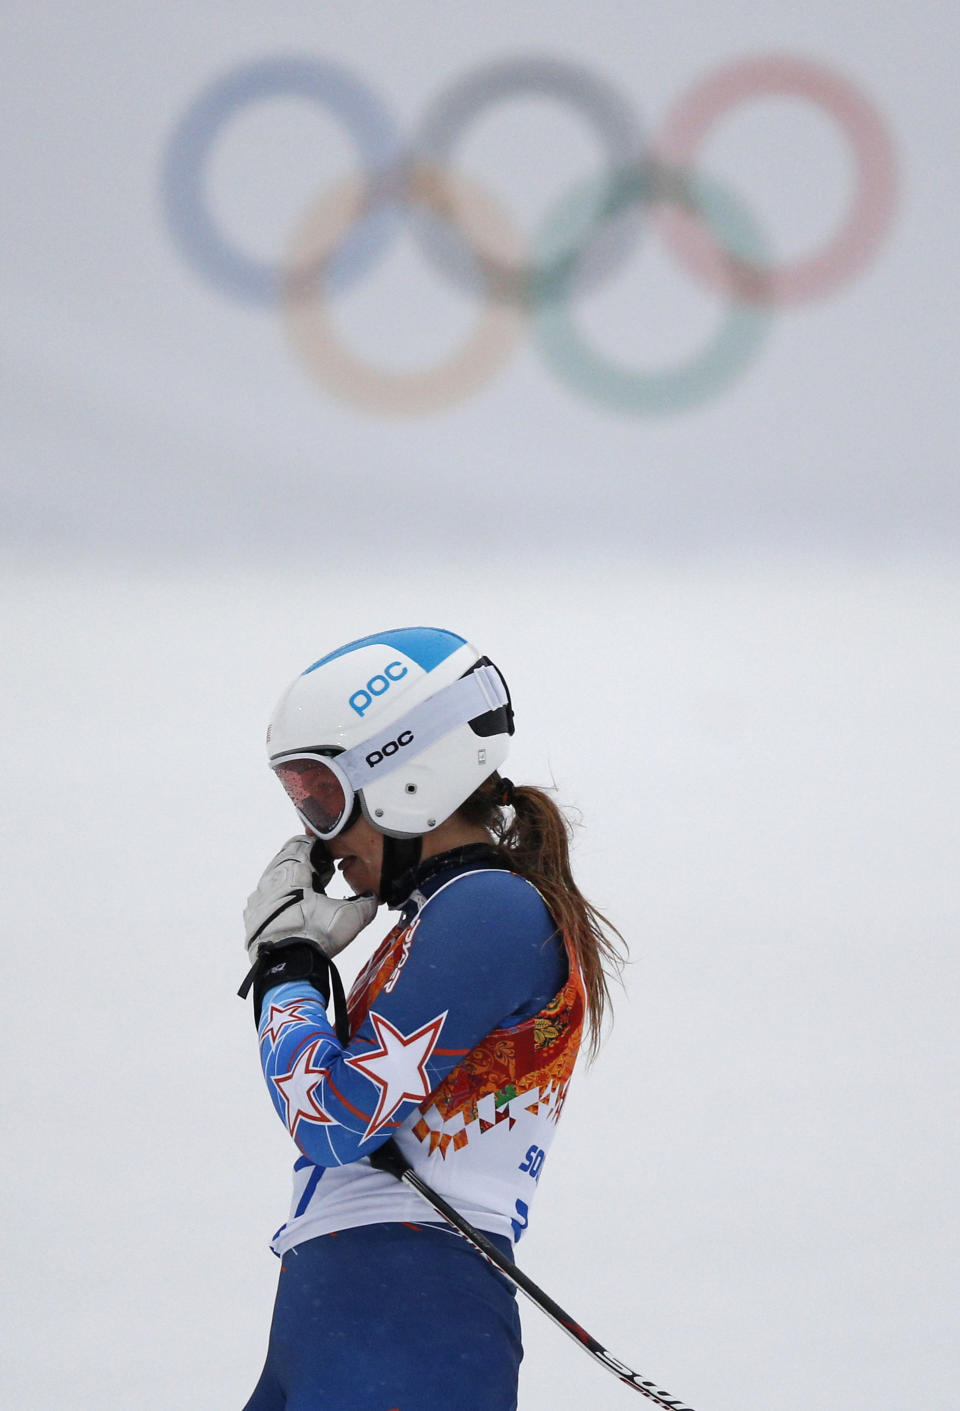 United States' Julia Mancuso reacts after skiing out of the first run of the women's giant slalom at the Sochi 2014 Winter Olympics, Tuesday, Feb. 18, 2014 in Krasnaya Polyana, Russia.(AP Photo/Christophe Ena)